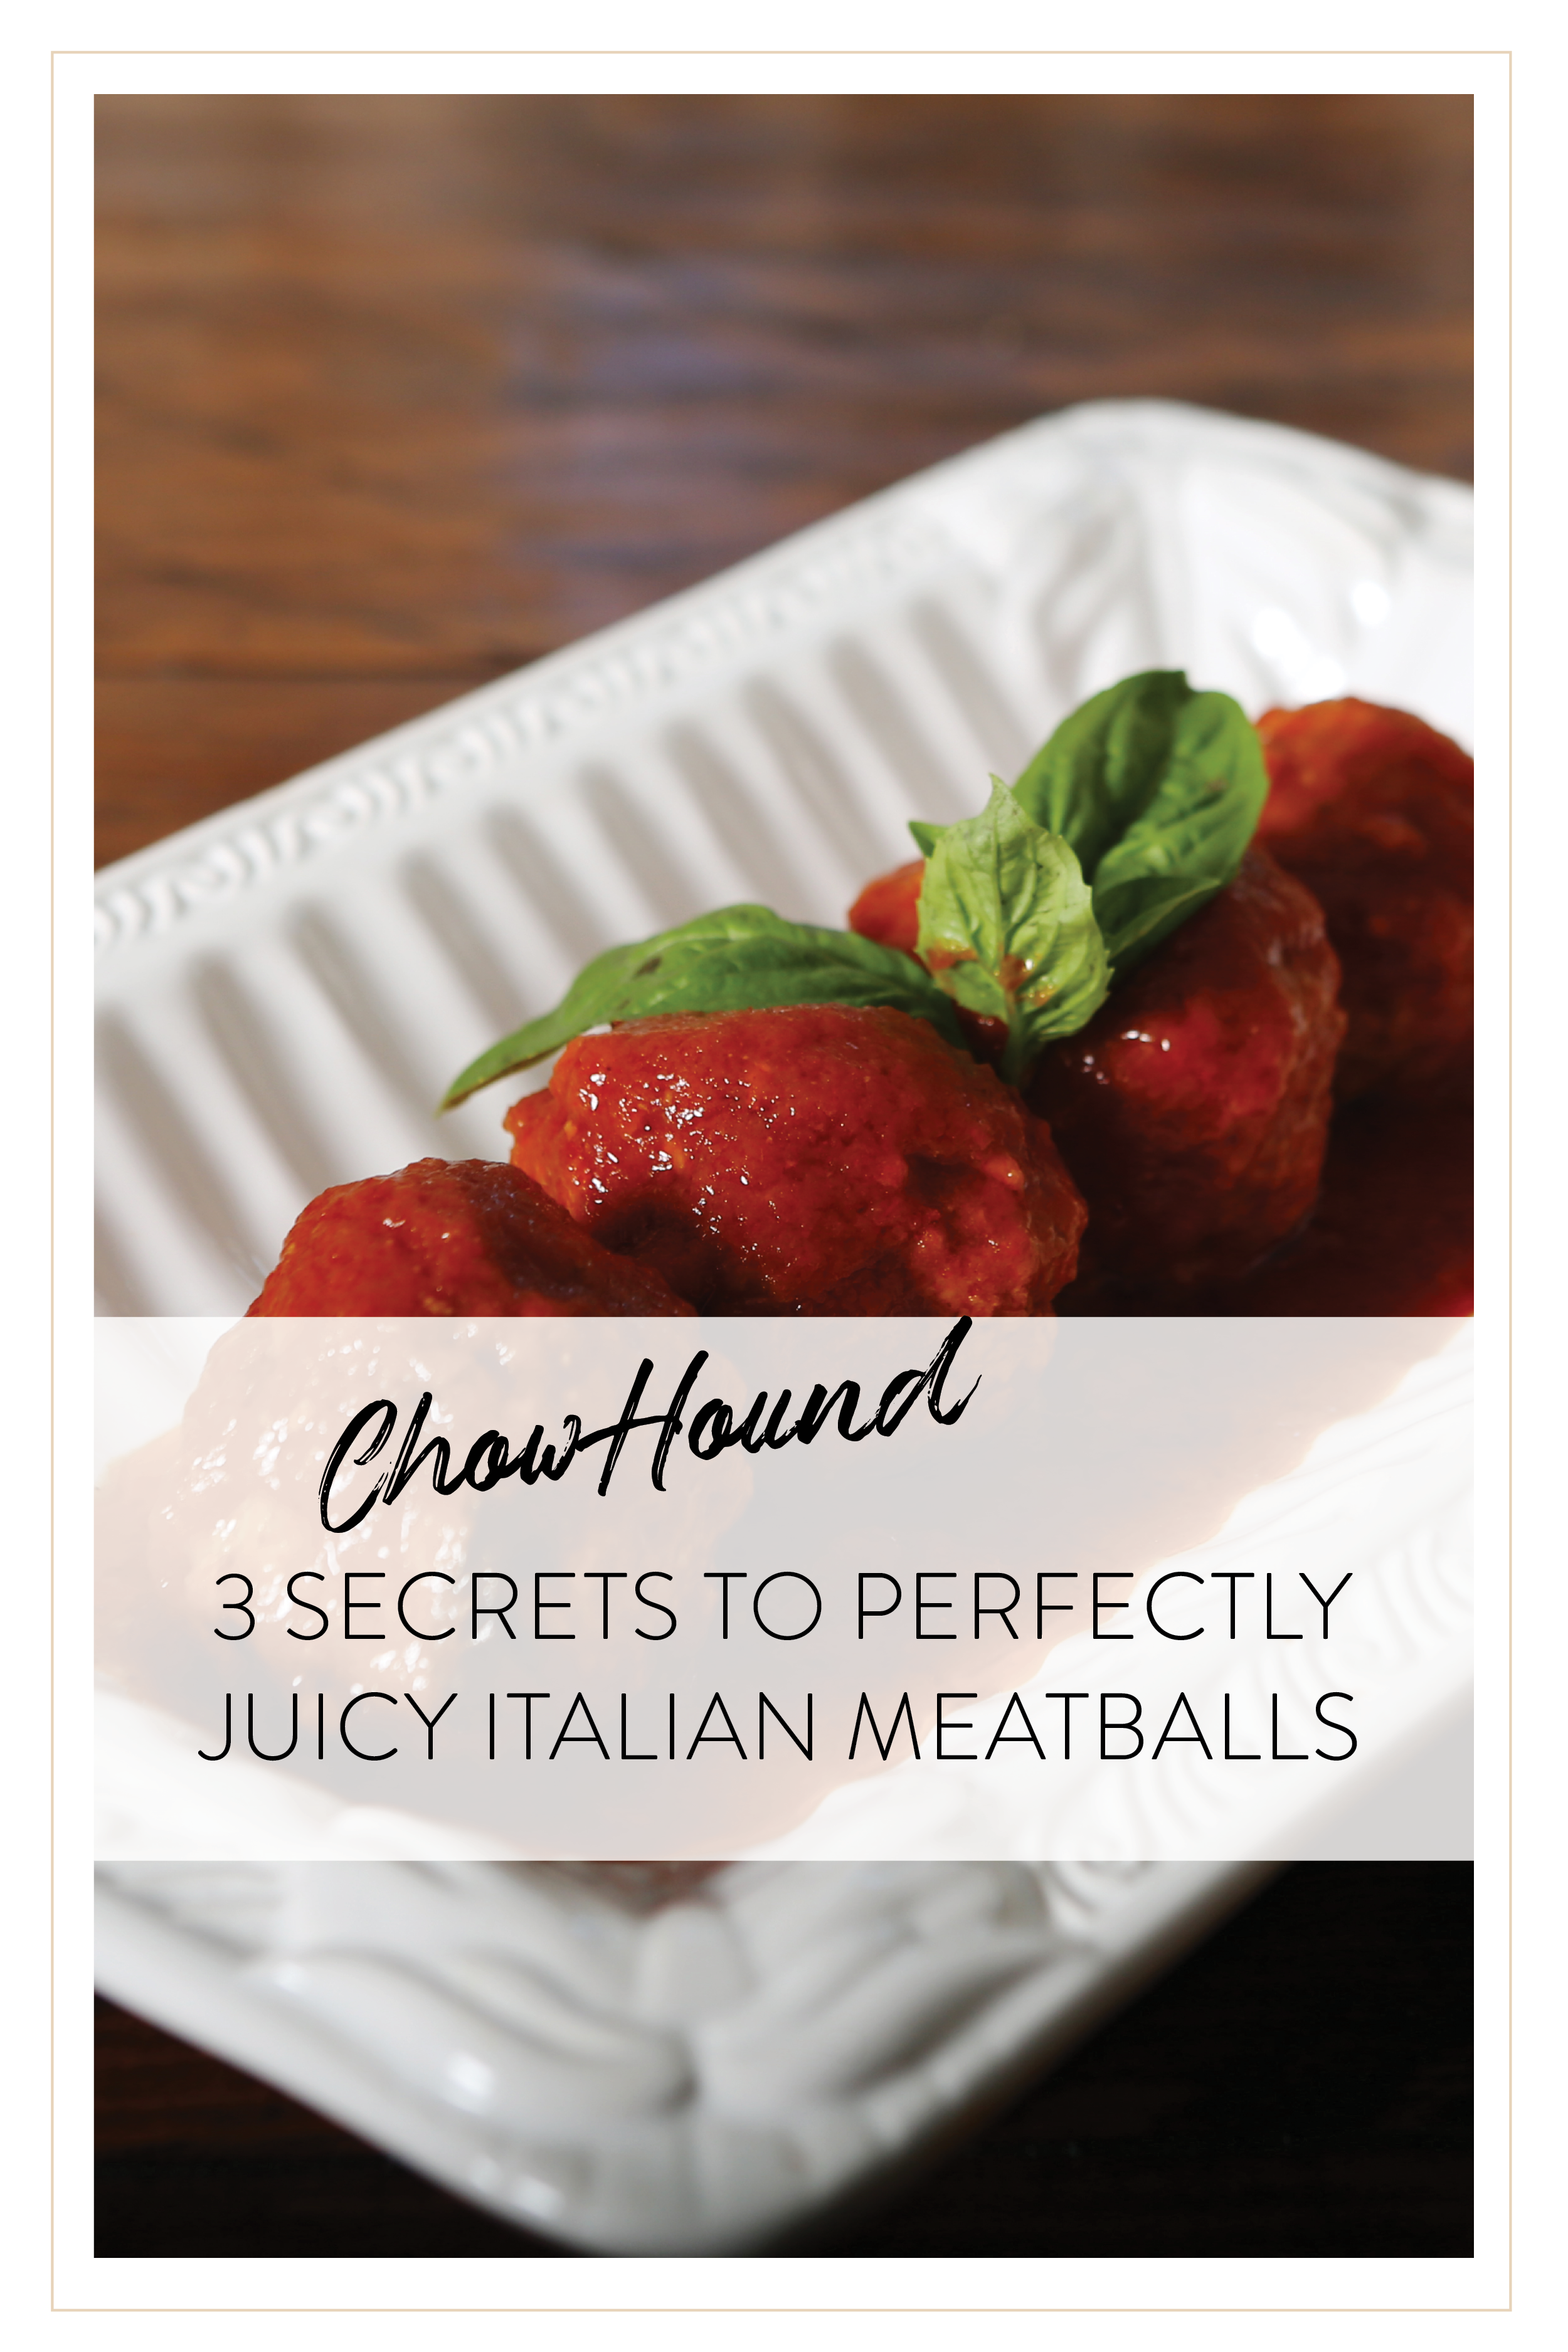 Chow Hound 3 Secrets to Perfectly Juicy Meatballs